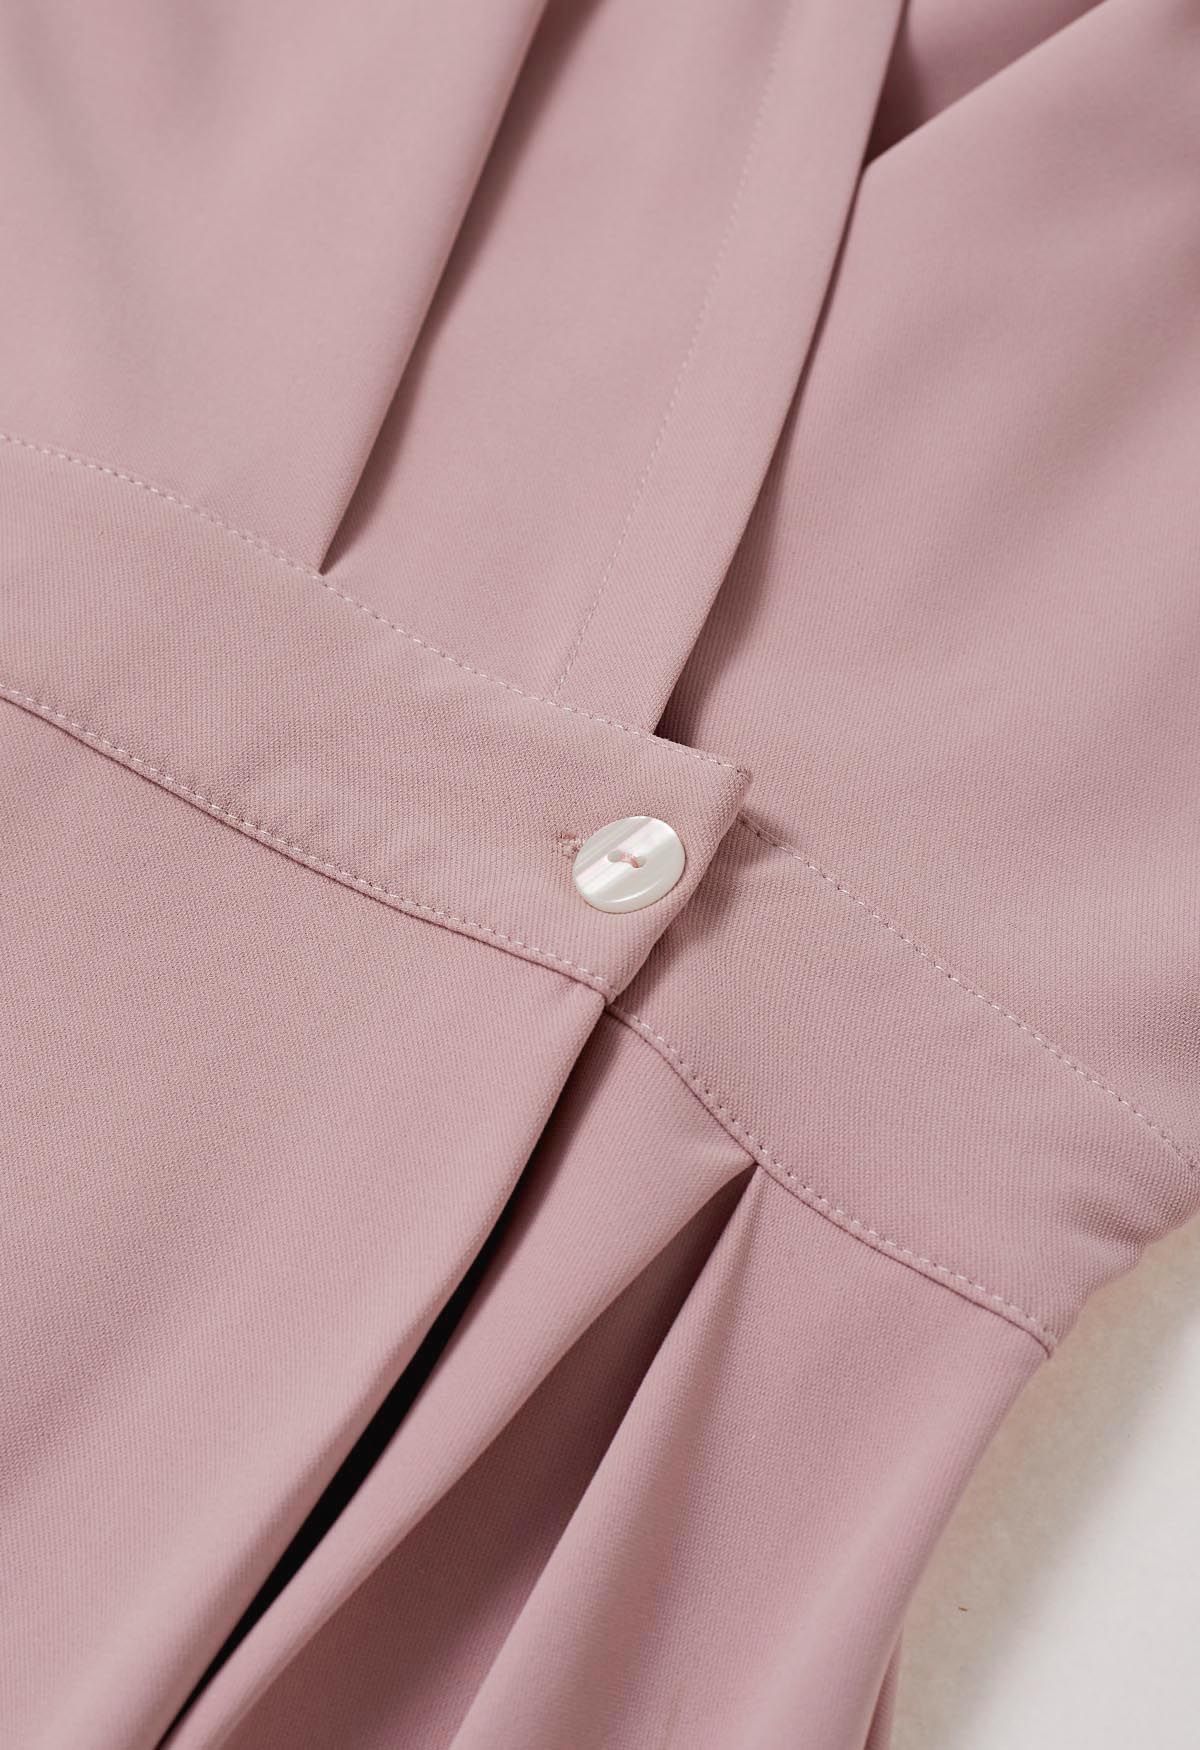 Buttoned Wrap Midi Shirt Dress in Pink